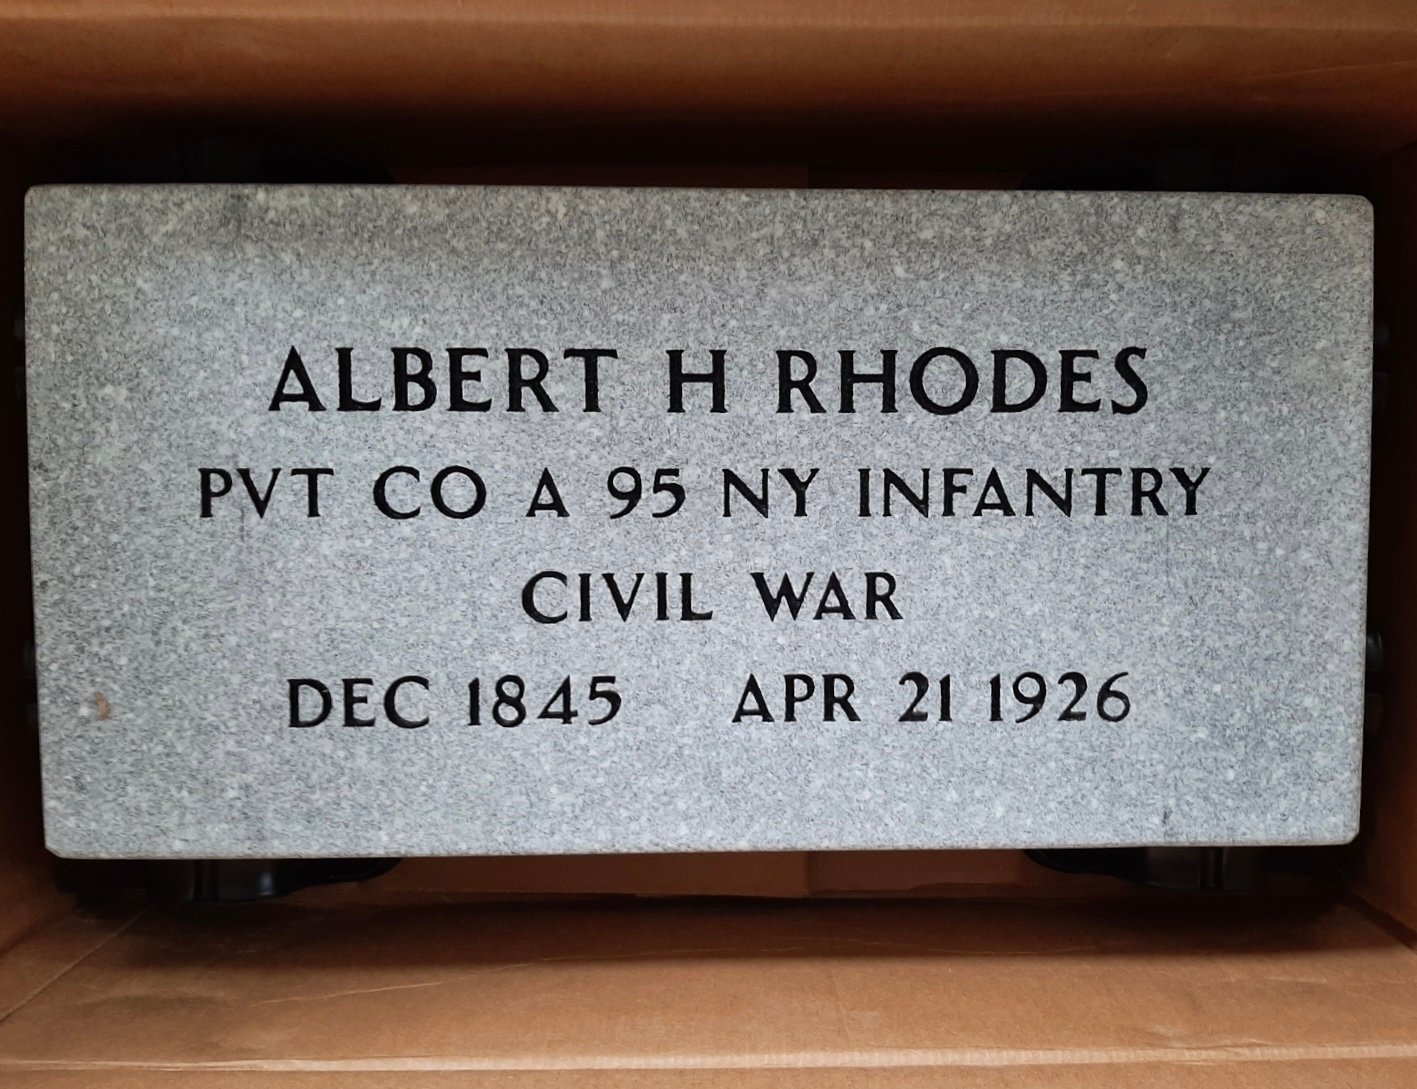 The Veterans Administration commissioned a new headstone in memory of Albert Henry Rhodes, a native of what is now Malverne who fought in the Civil War.